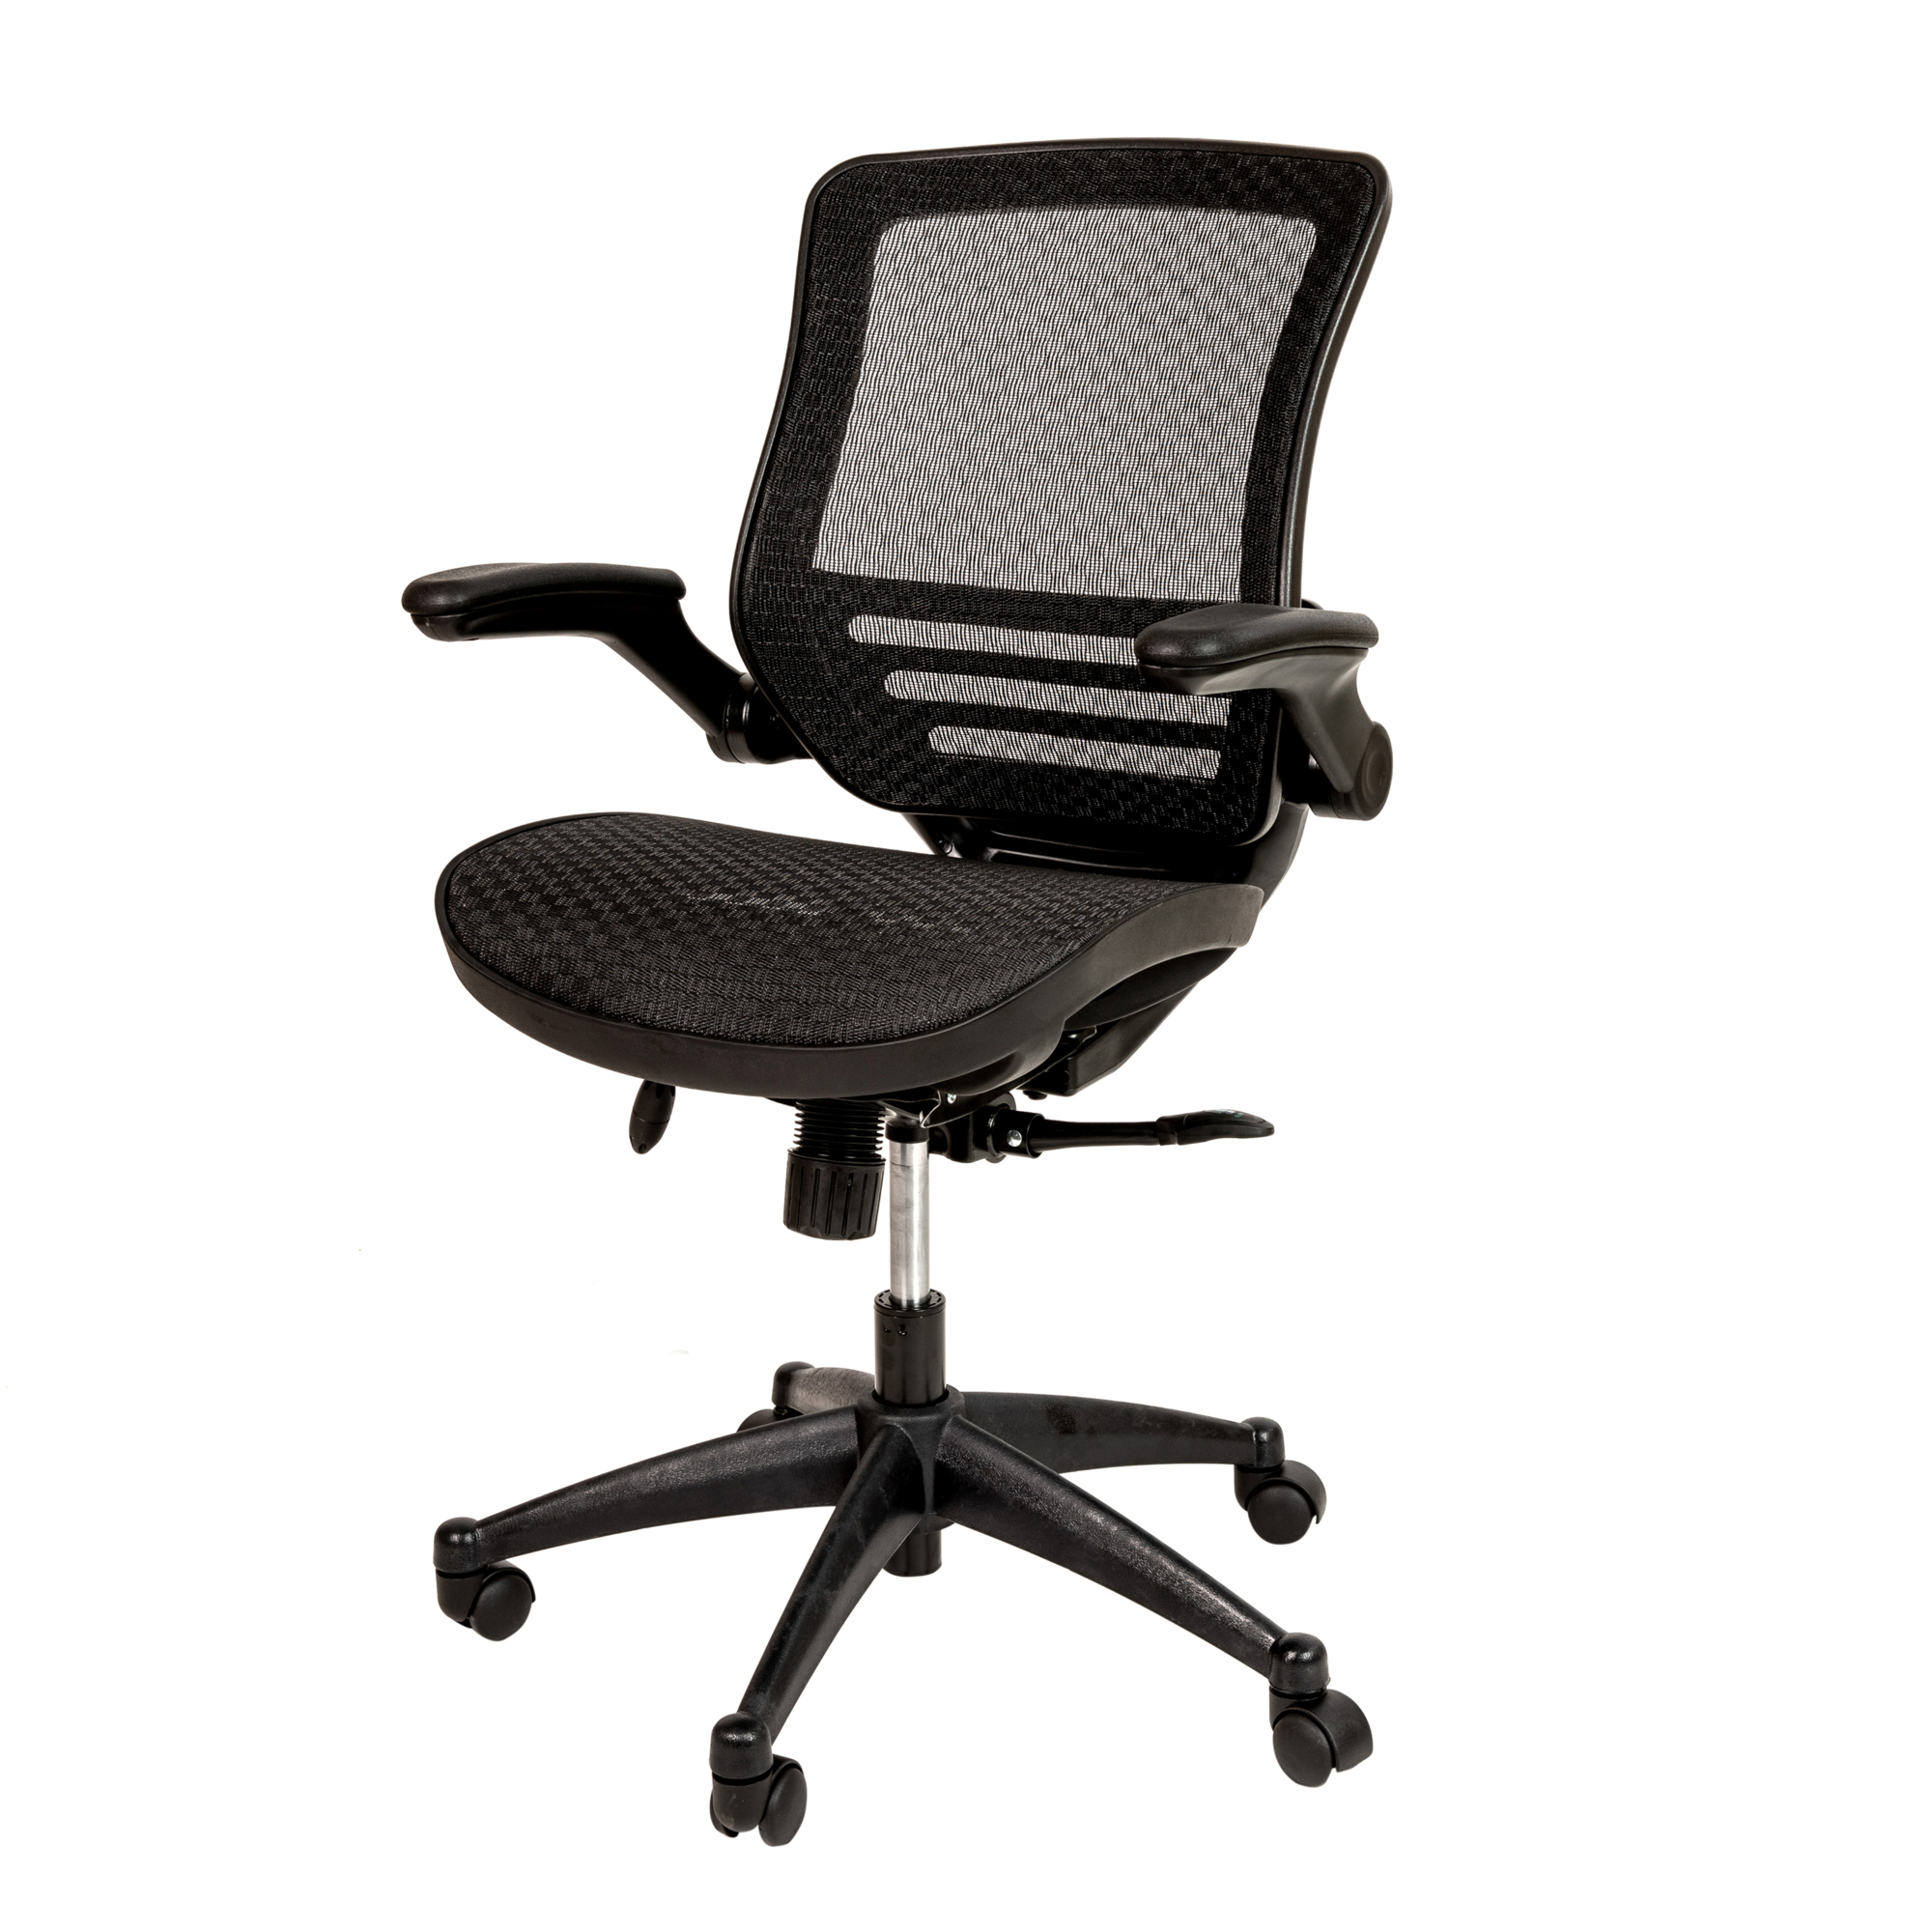 Flash Furniture, Black Mid-Back Mesh Office Chair with Flip-Up Arms, Primary Color Black, Included (qty.) 1, Model BL8801XBK